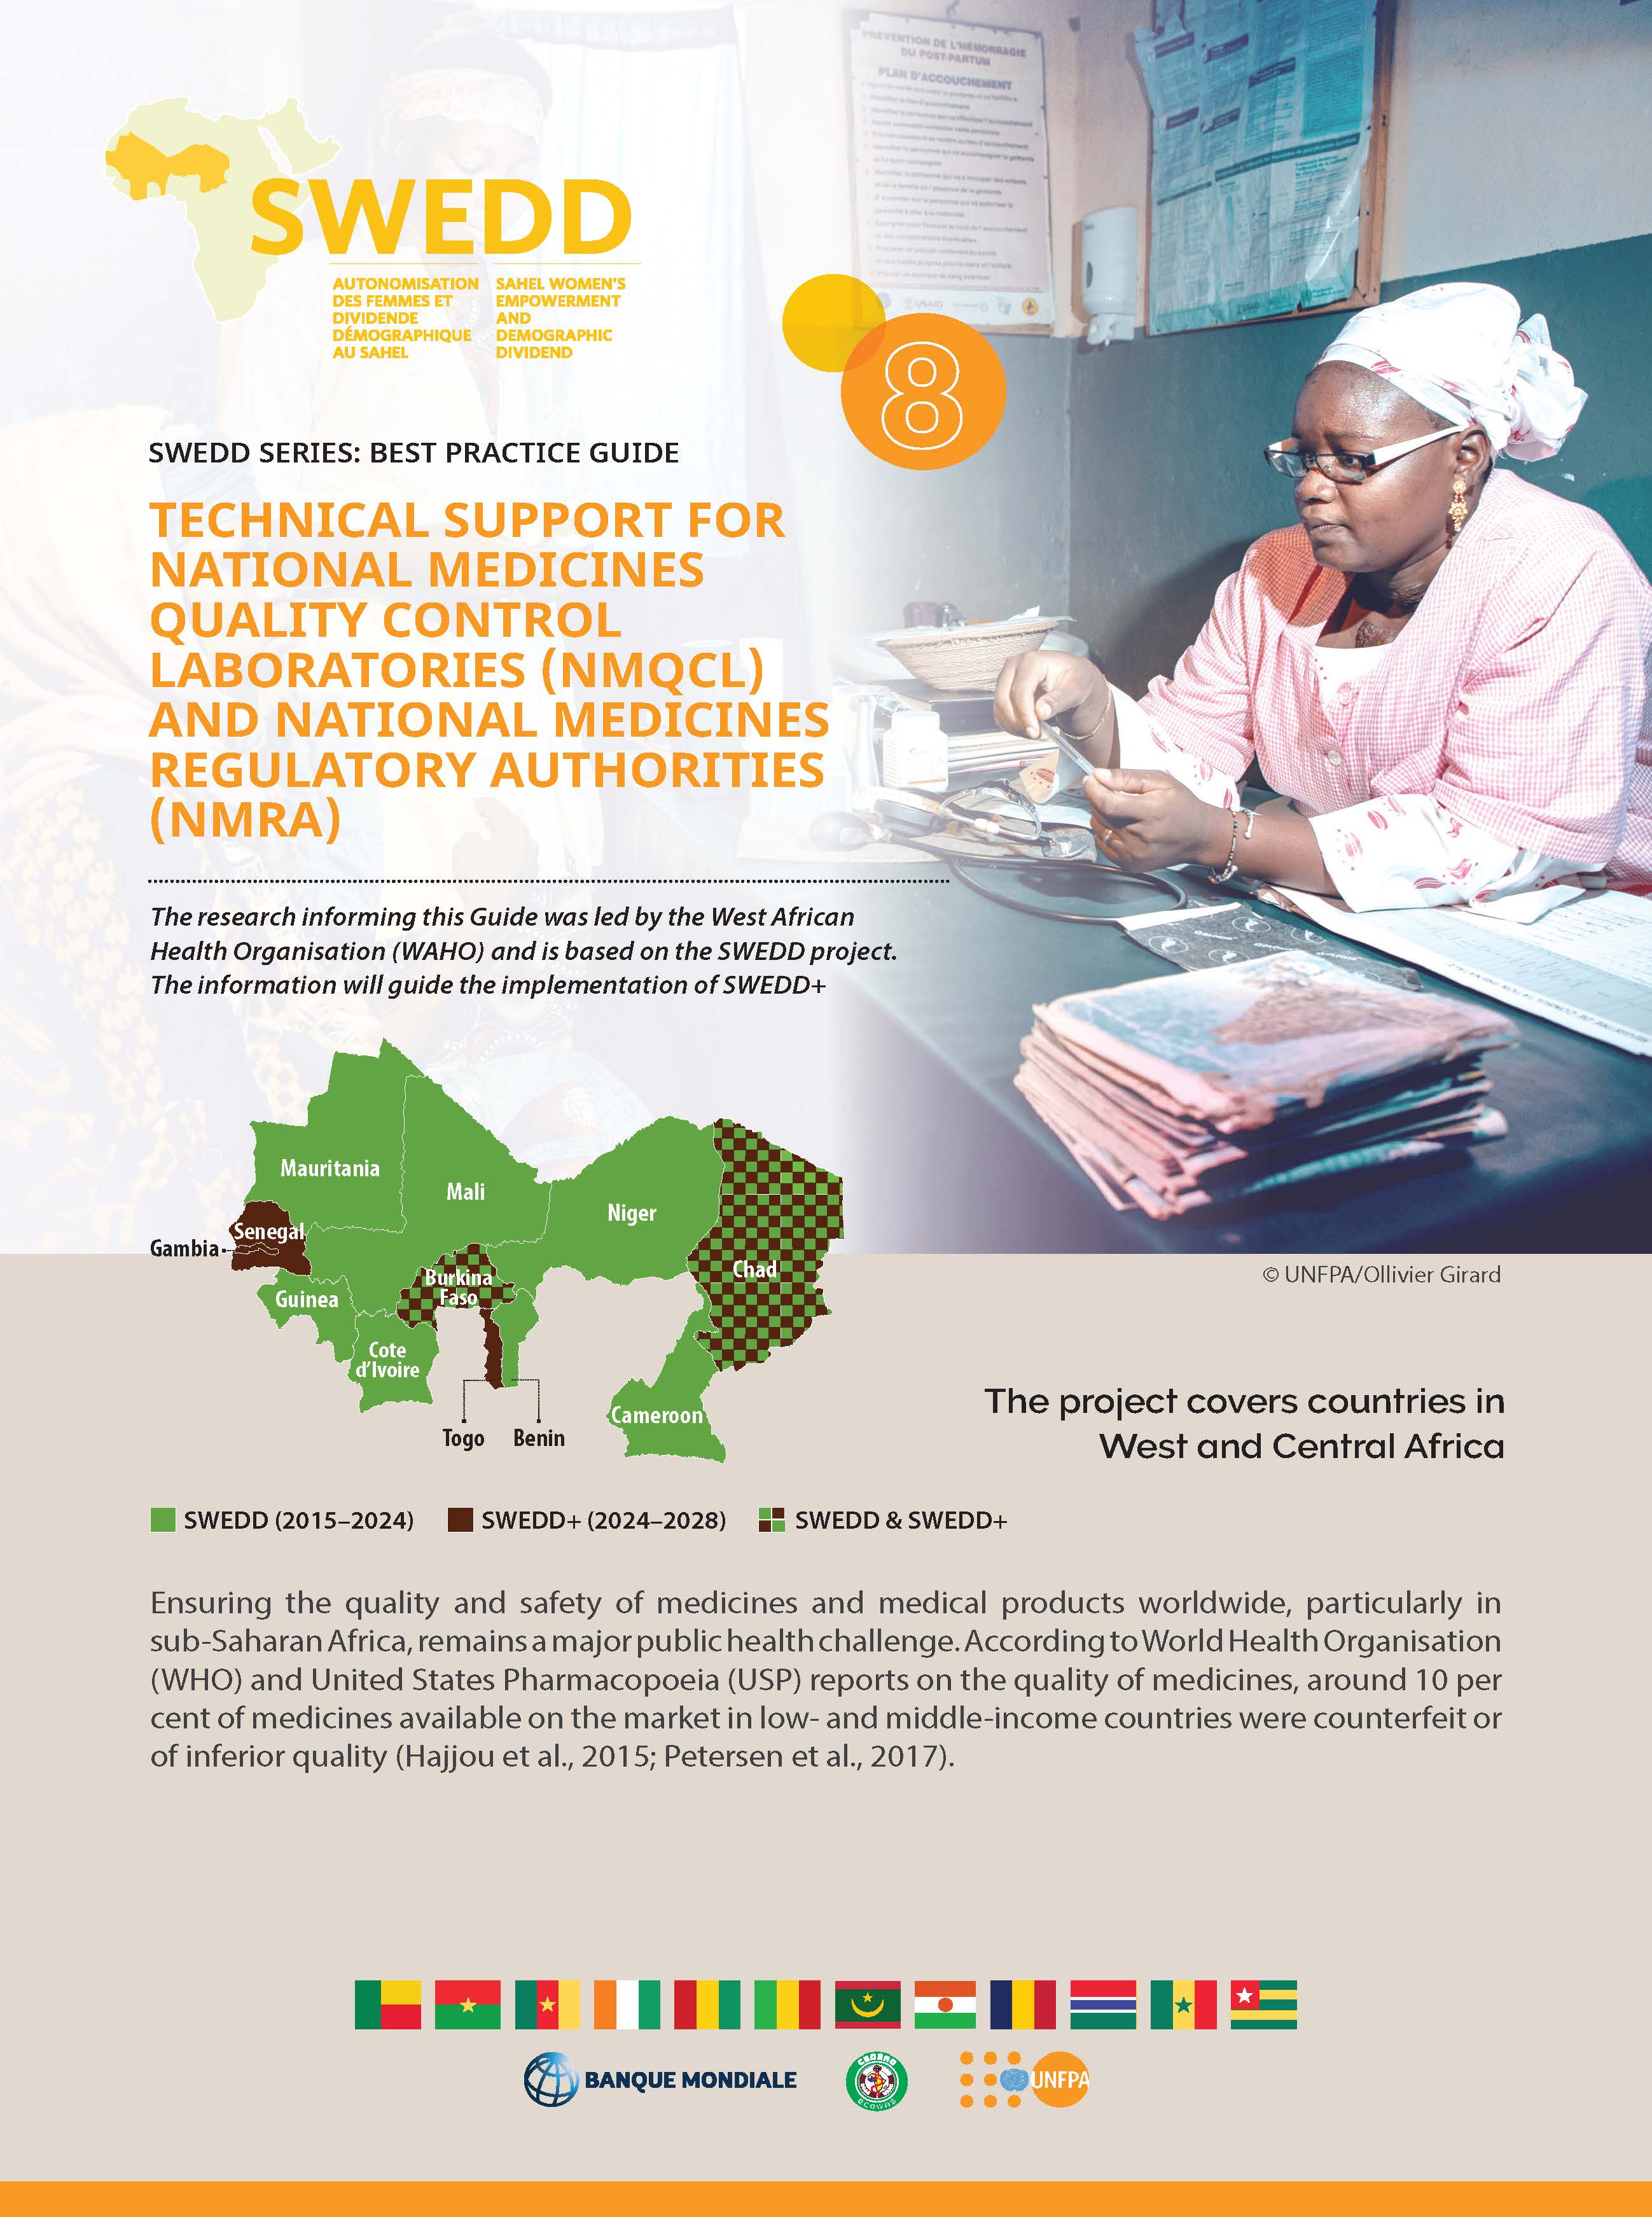 8. Technical support for national medicines quality control laboratories and national medicines regulatory authorities